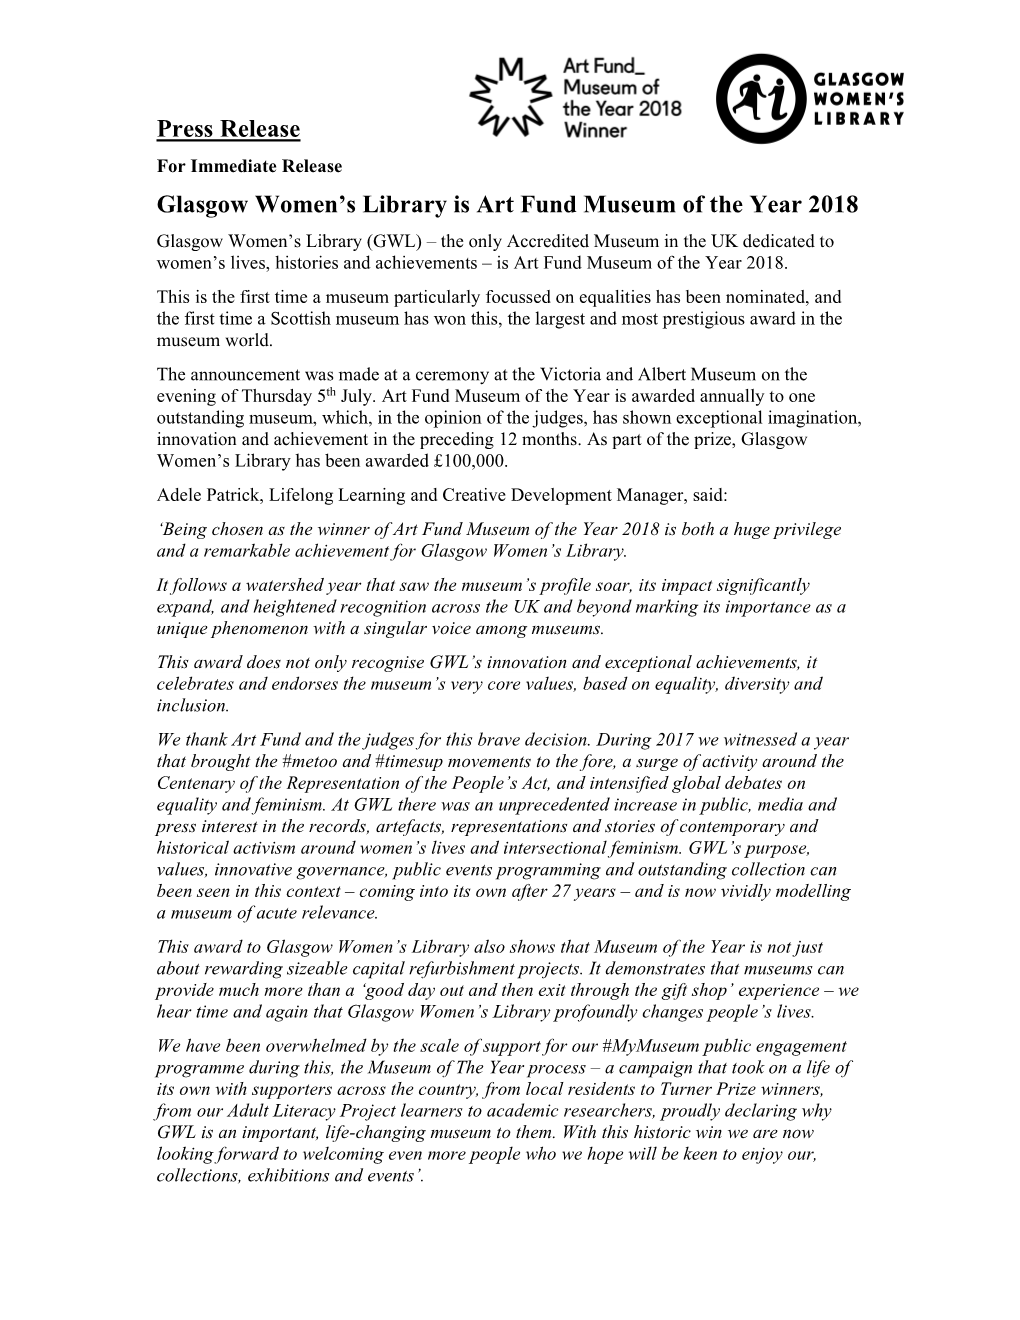 Glasgow Women's Library Is Art Fund Museum of the Year 2018